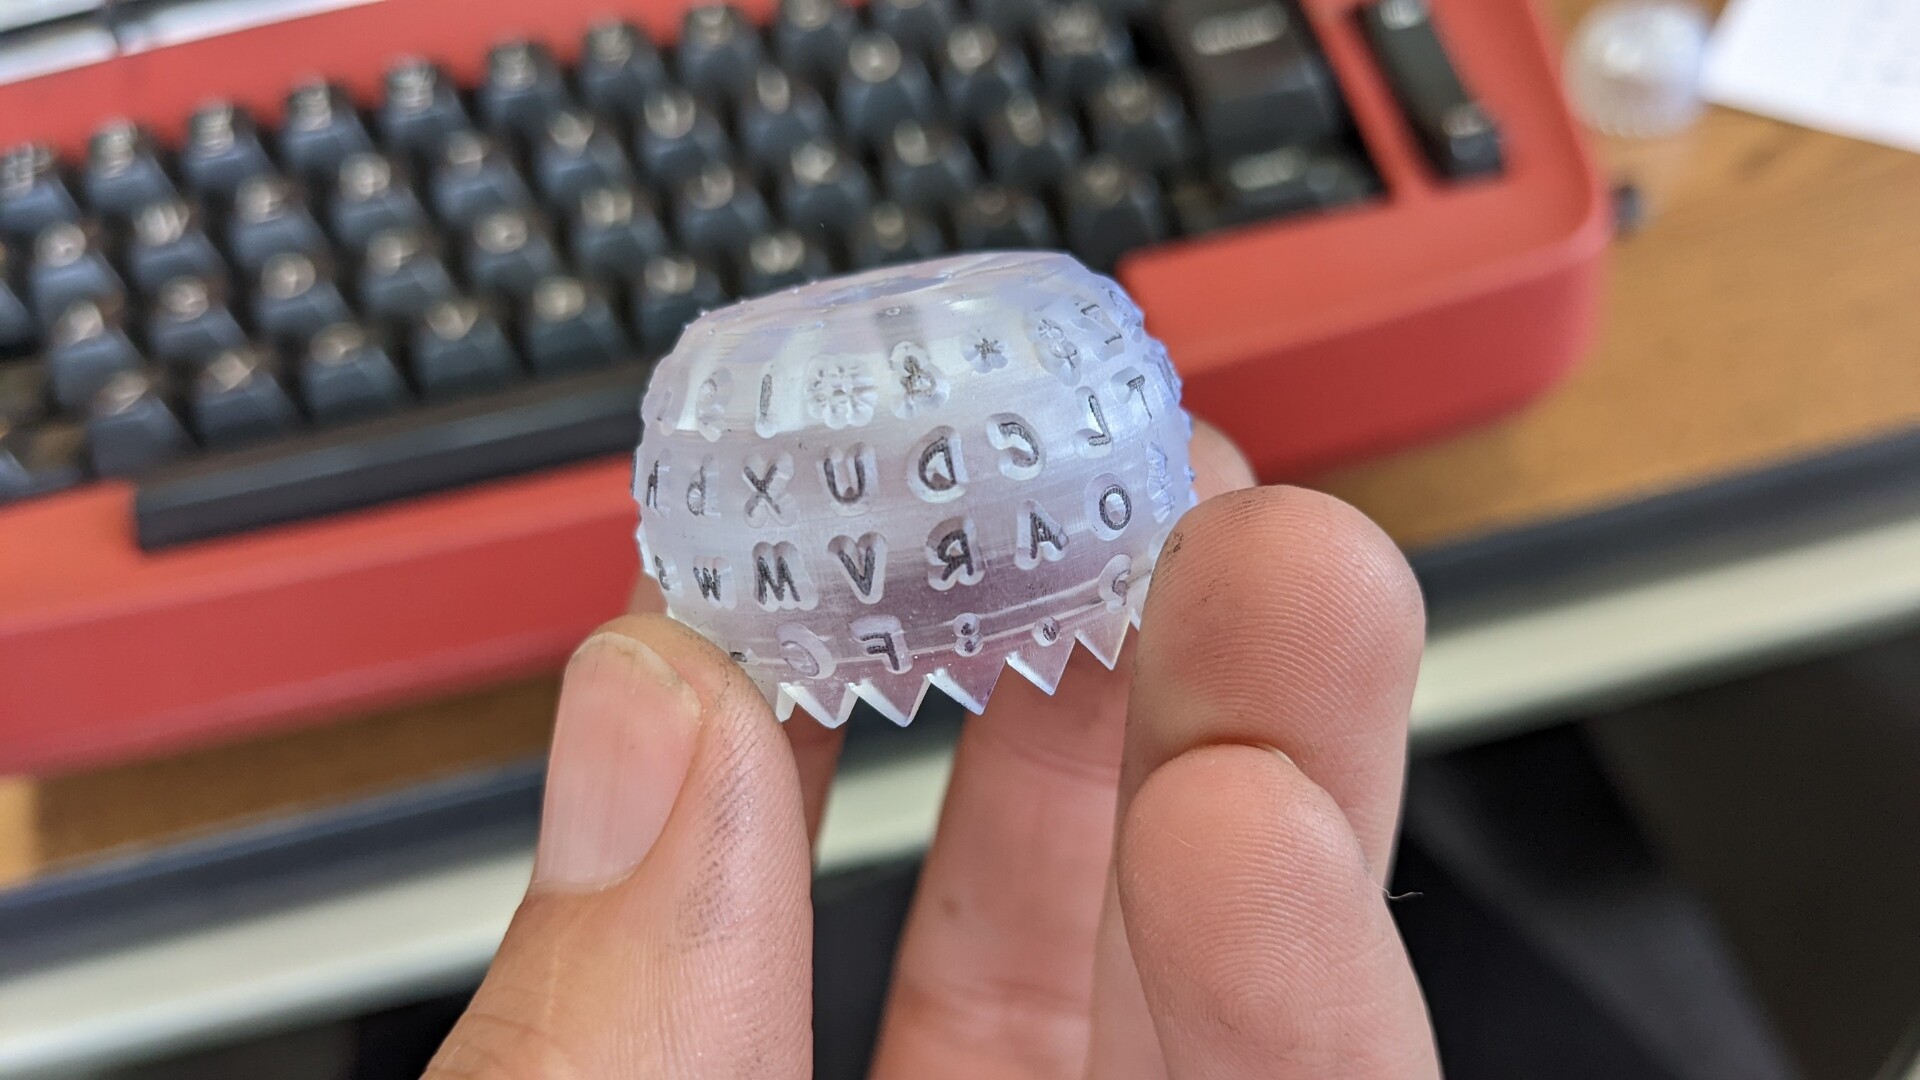 A 3D printed typeball for the IBM Selectric. The font is Comic Sans. There is ink on most of the letters.